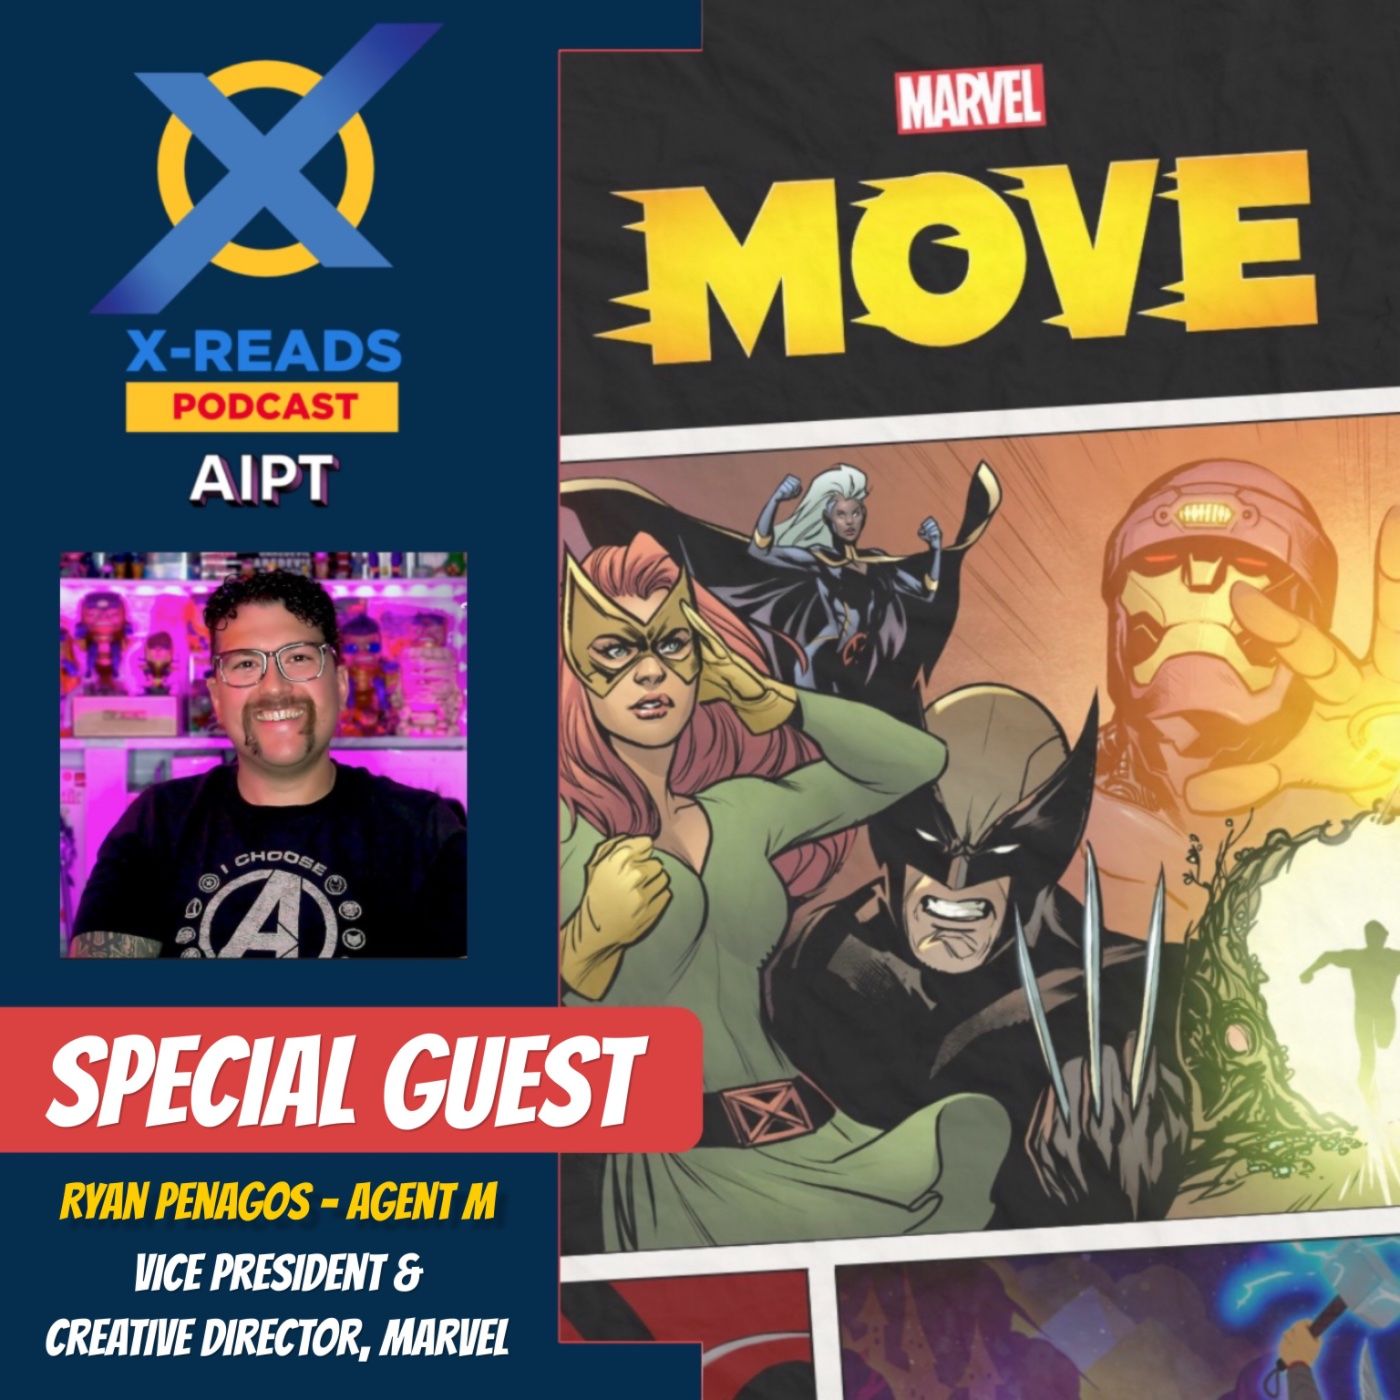 Ep 109: Run Alongside the X-Men with Marvel Move Fitness App! Guest: Ryan Penagos a.k.a Agent M